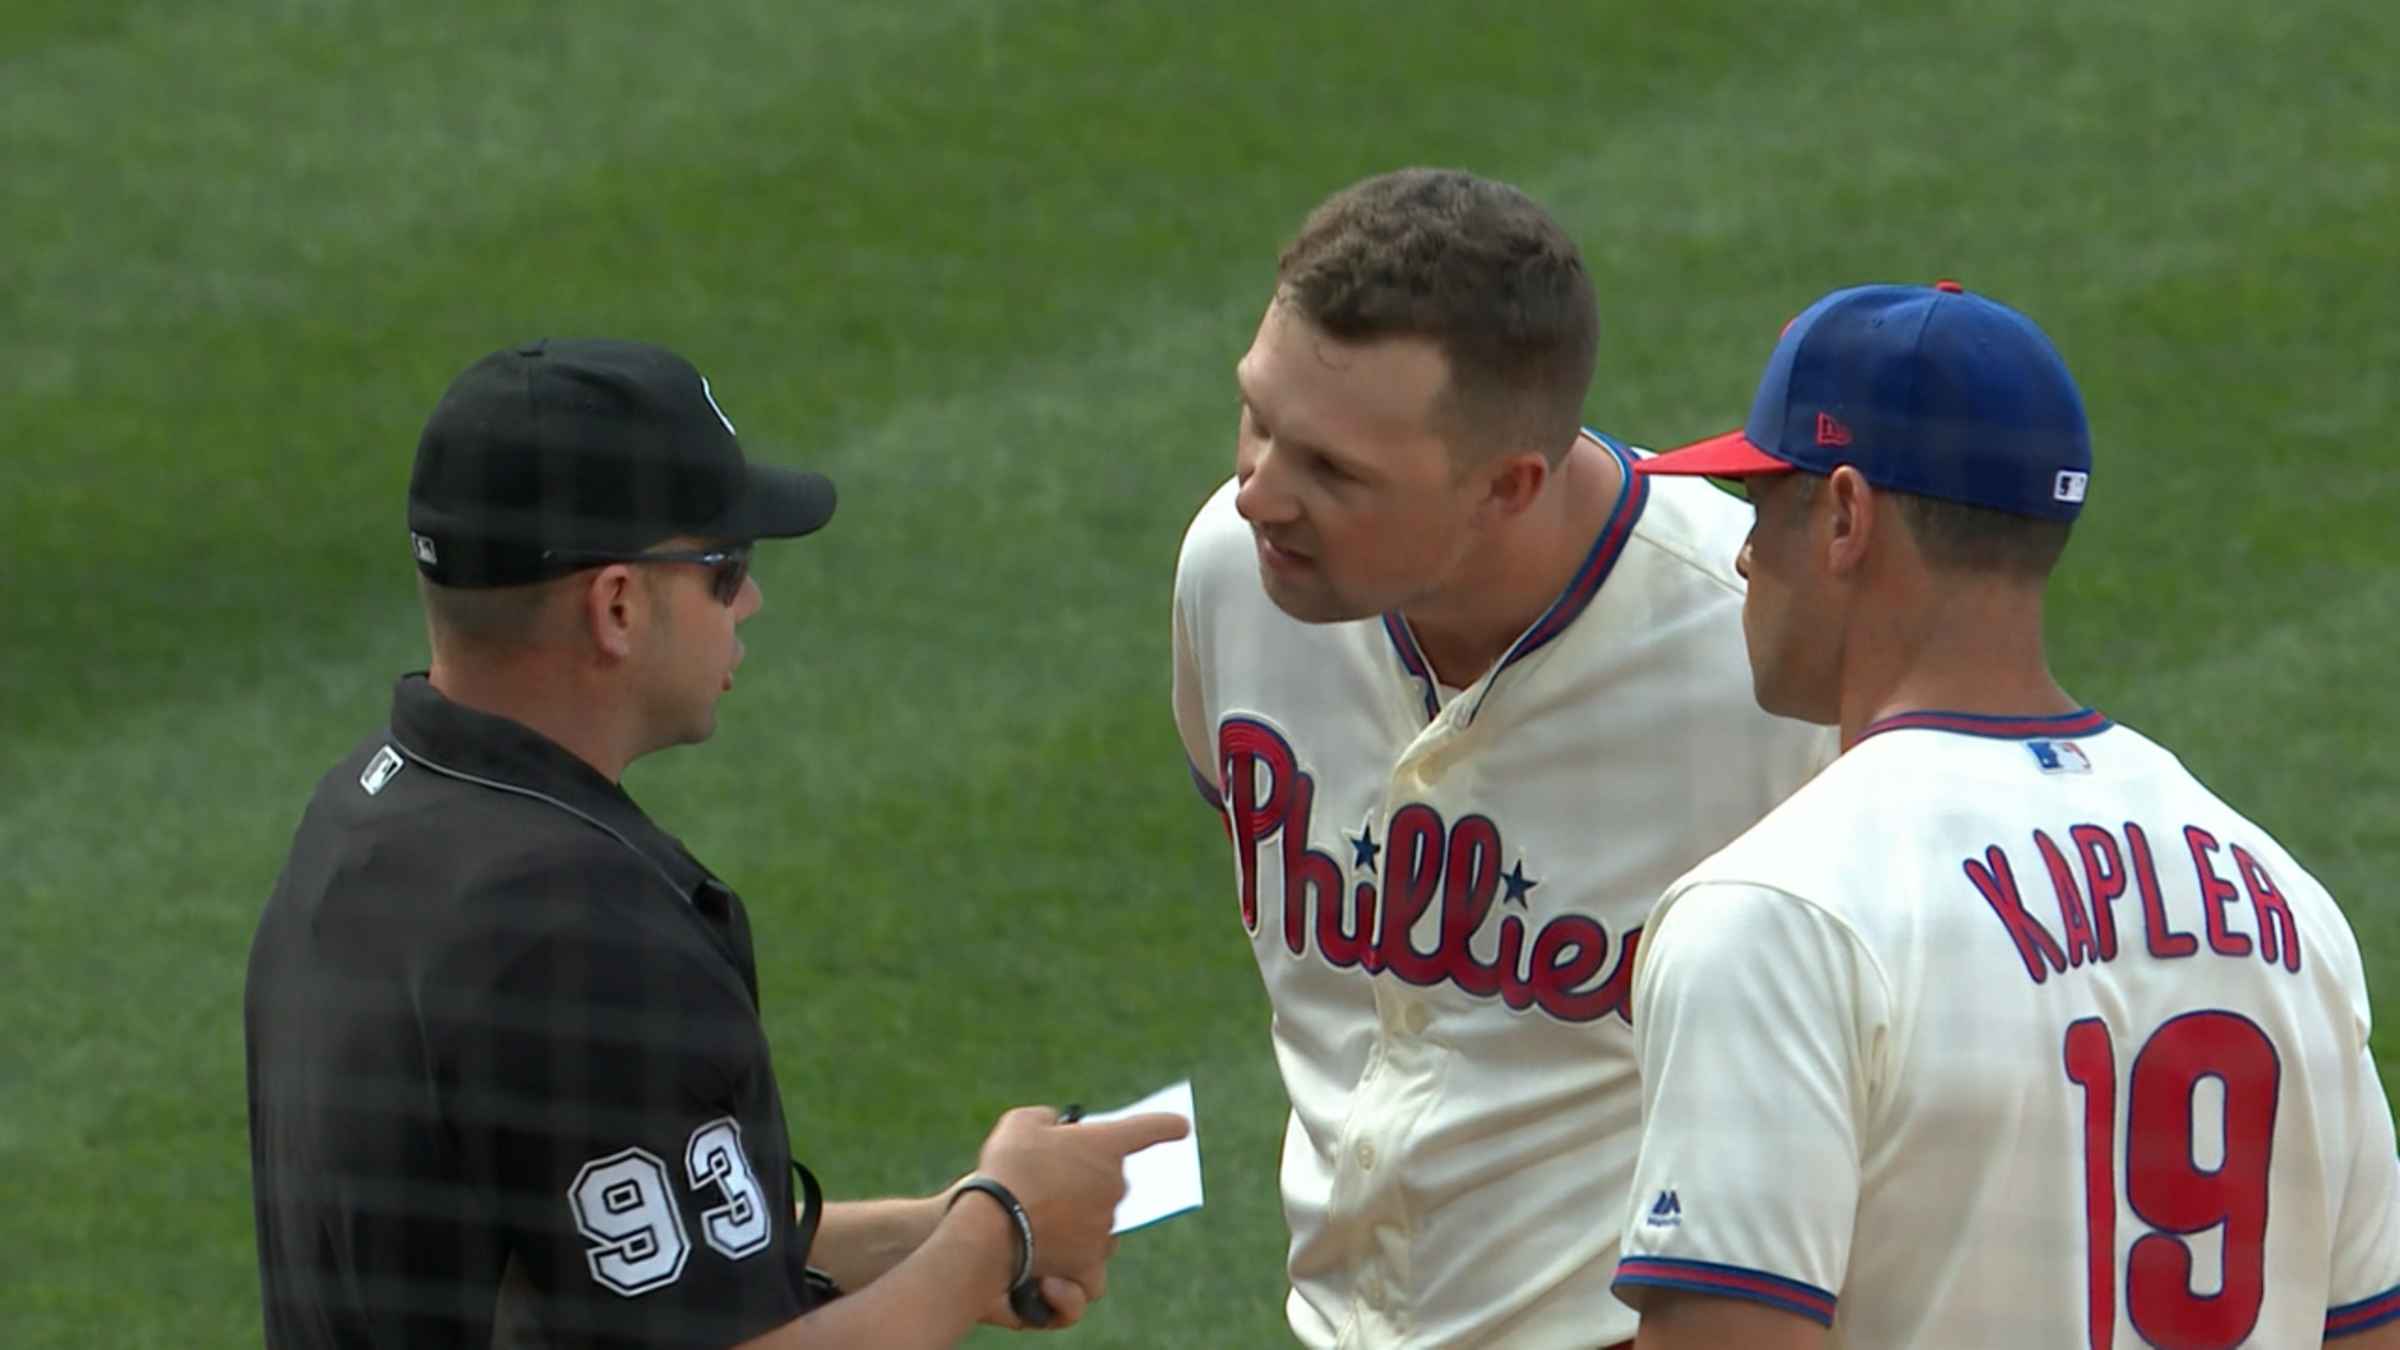 Rhys Hoskins dropped the ball & had to hold back his Fist Pump